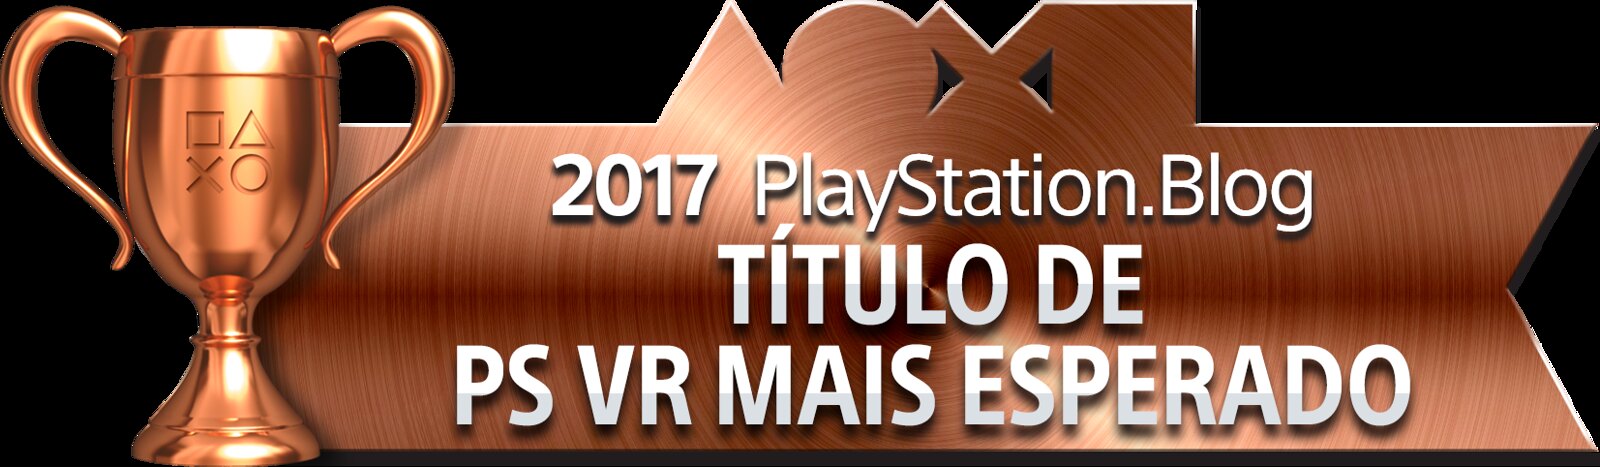 PlayStation Blog Game of the Year 2017 - Most Anticipated PS VR Title (Bronze)